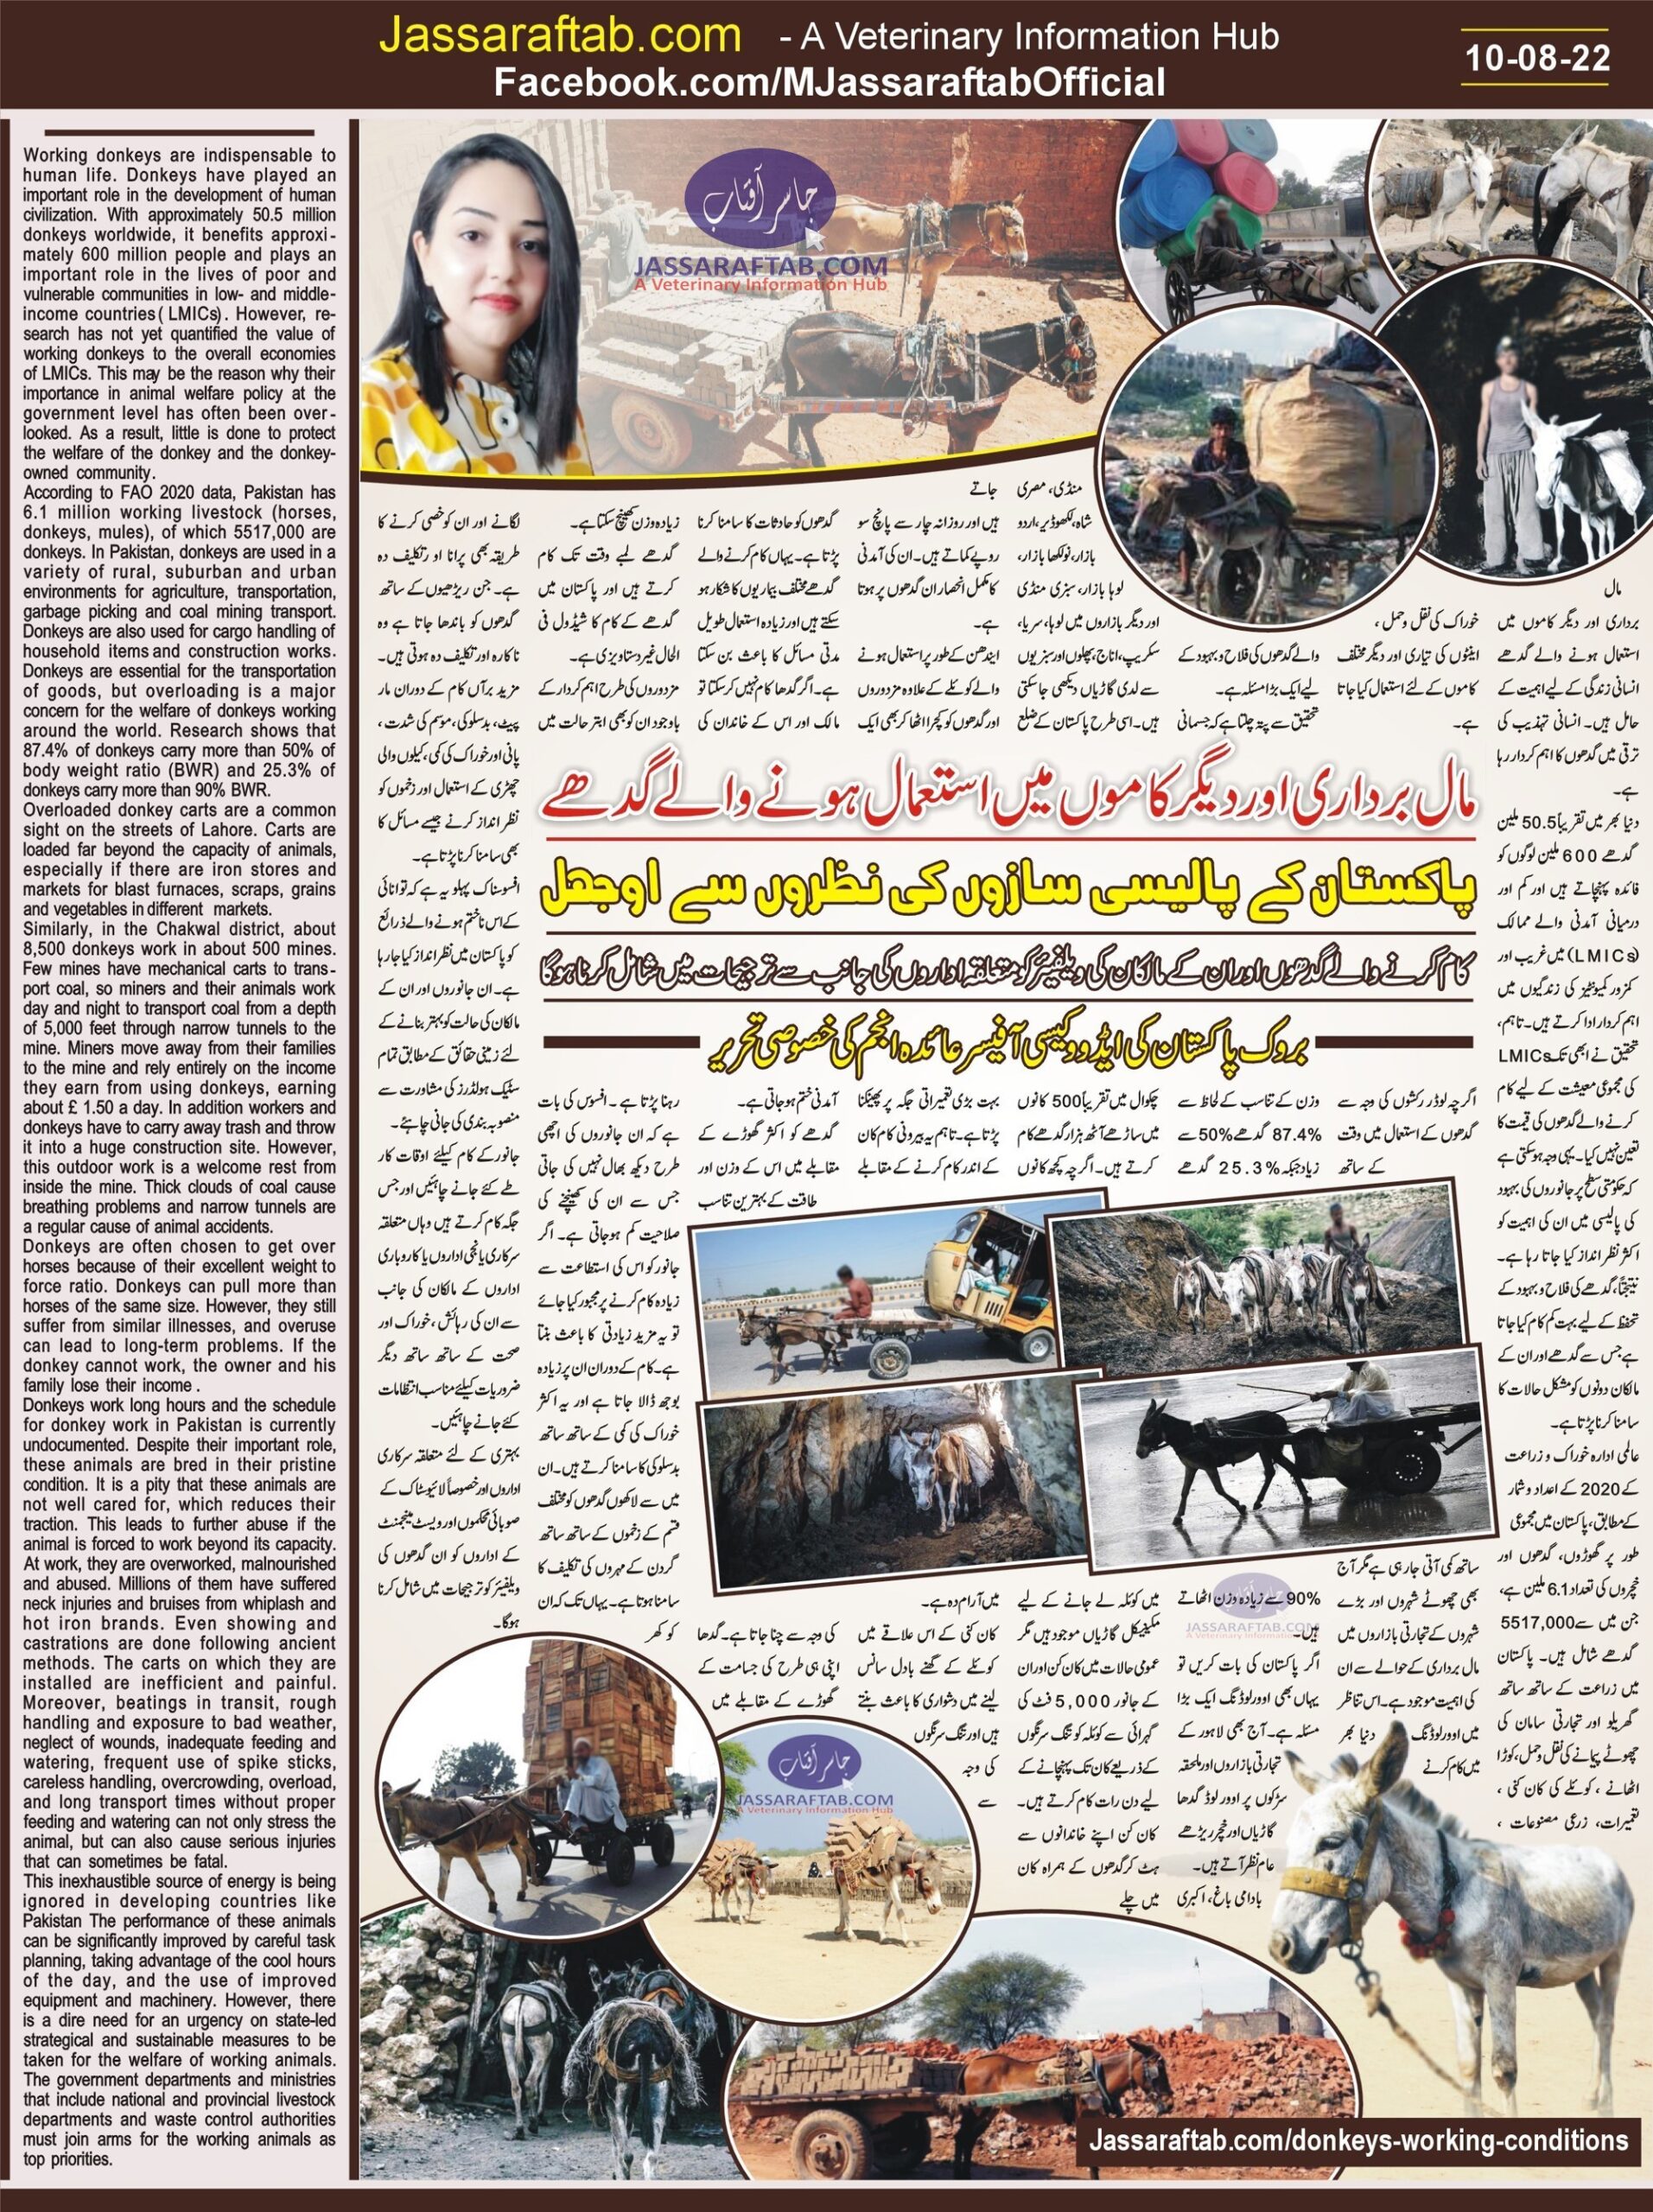 Condition of Working Donkeys in Pakistan and Donkey Welfare. Welfare of donkeys